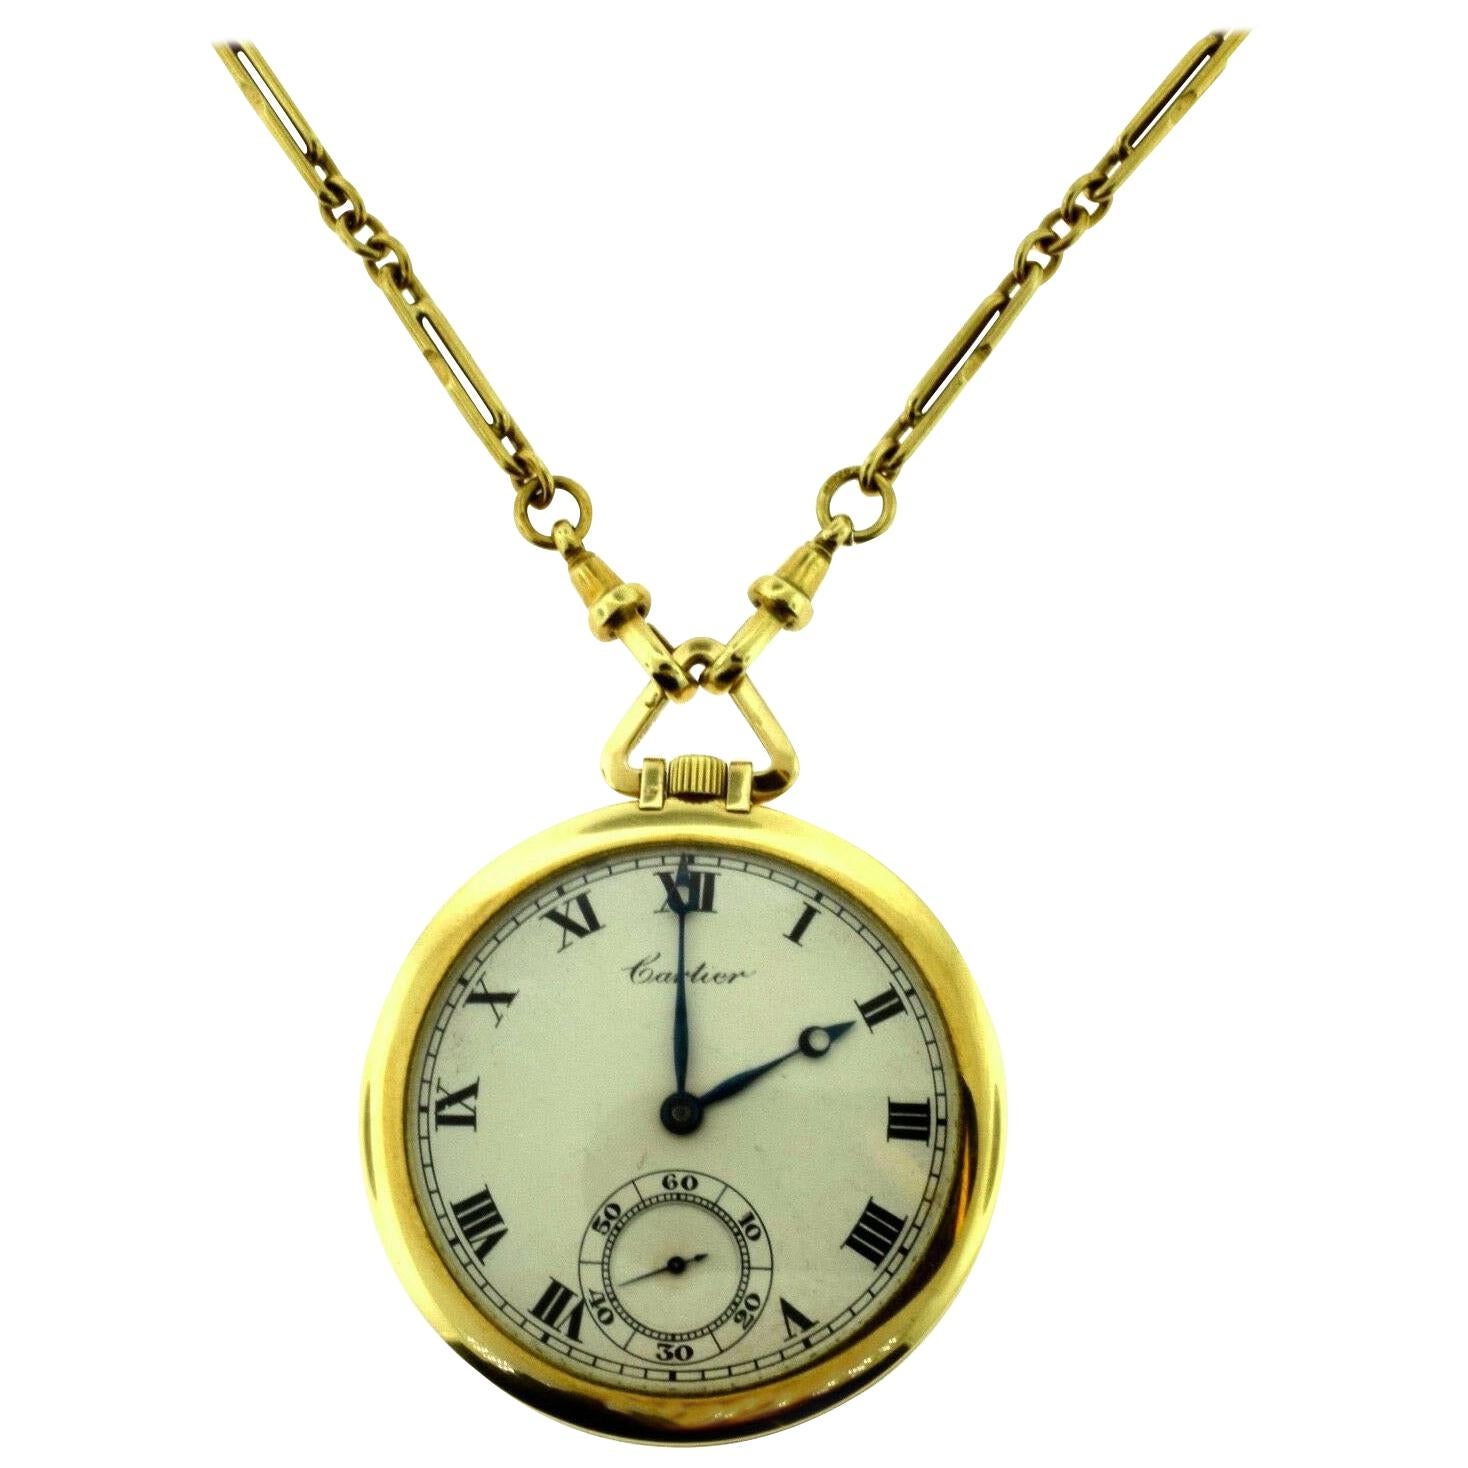 Cartier Le Coultre European Movement Pocket Watch in Yellow Gold with Chain